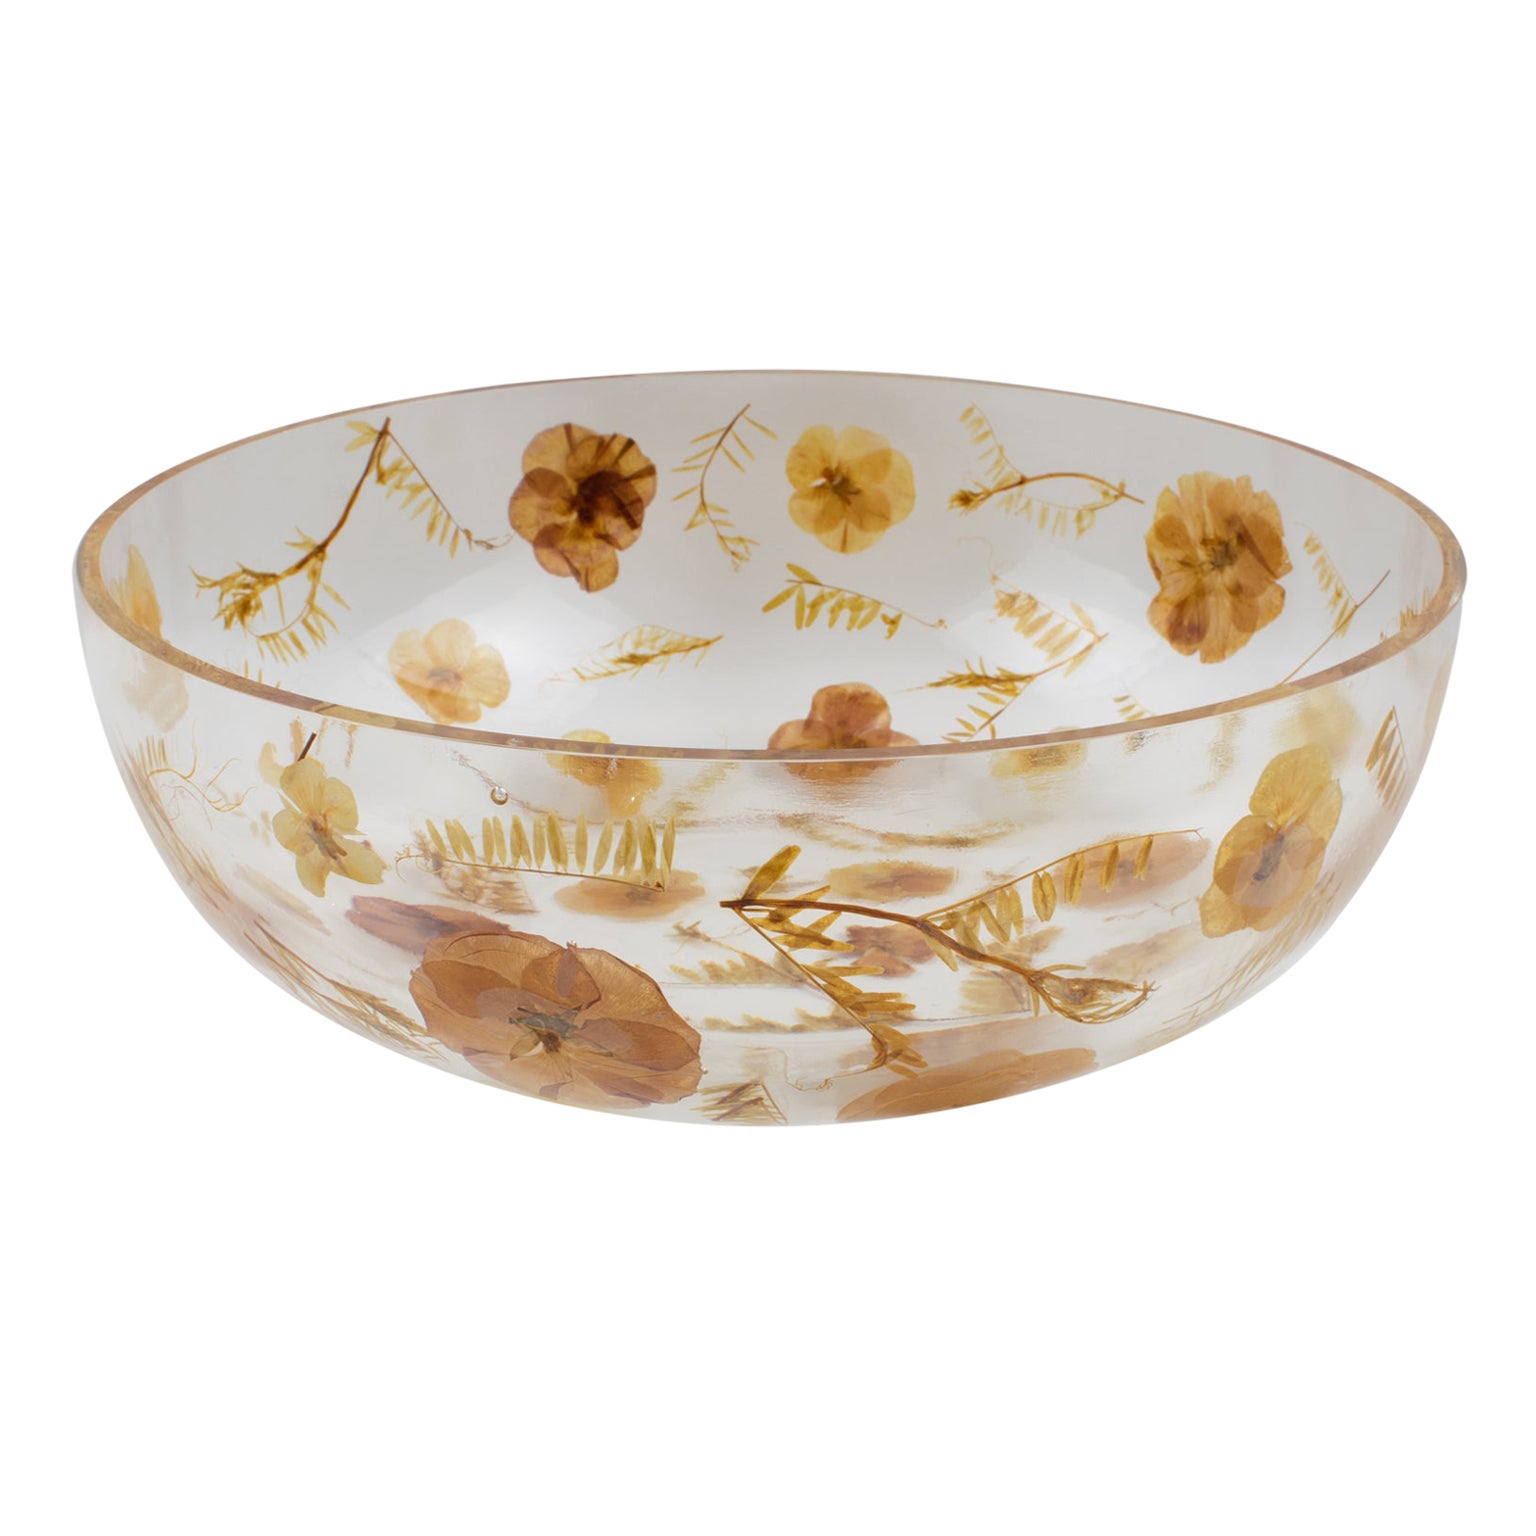 Resin Bowl Centerpiece with Leaves and Flowers Inclusions, Italy 1970s